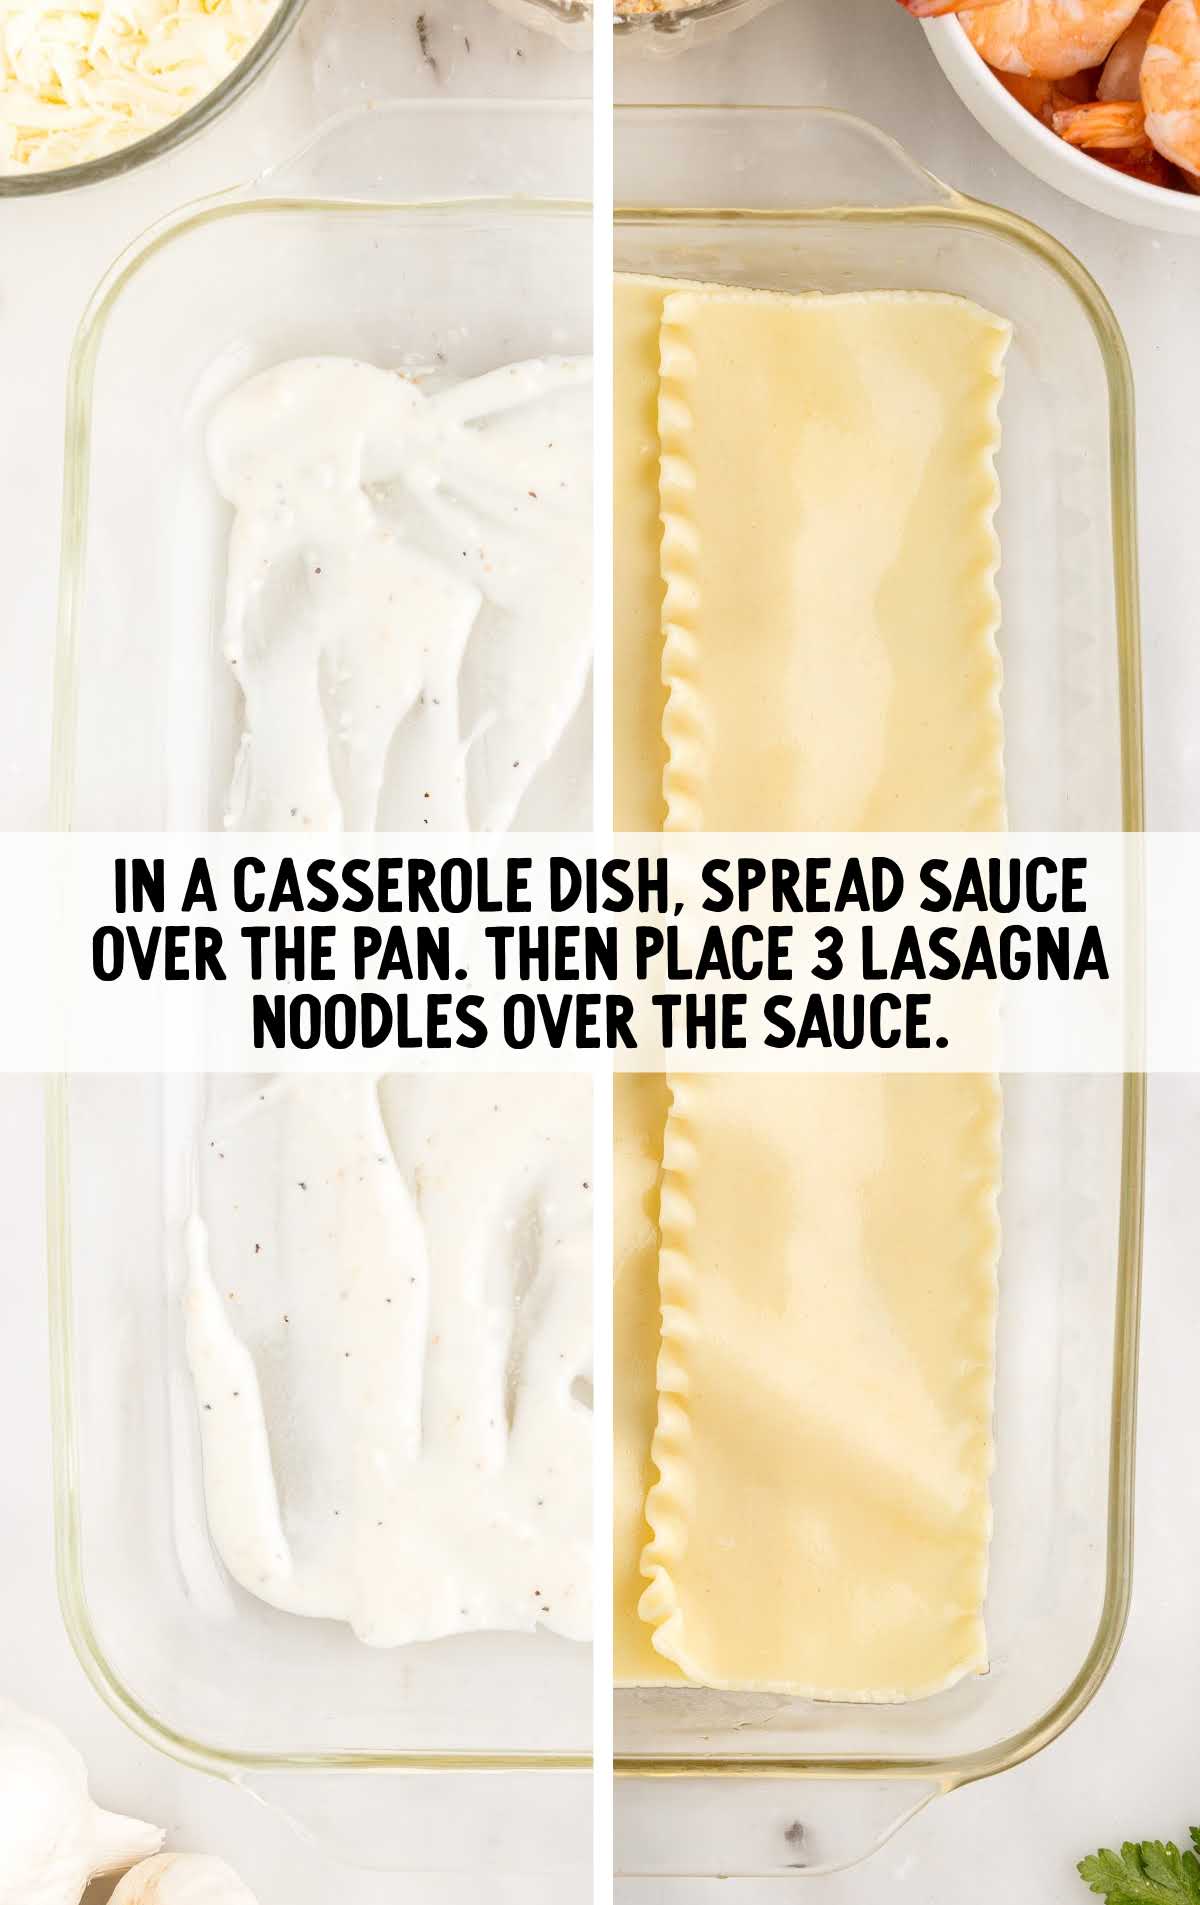 sauce spread over the pan and lasagna noodles spread over the sauce